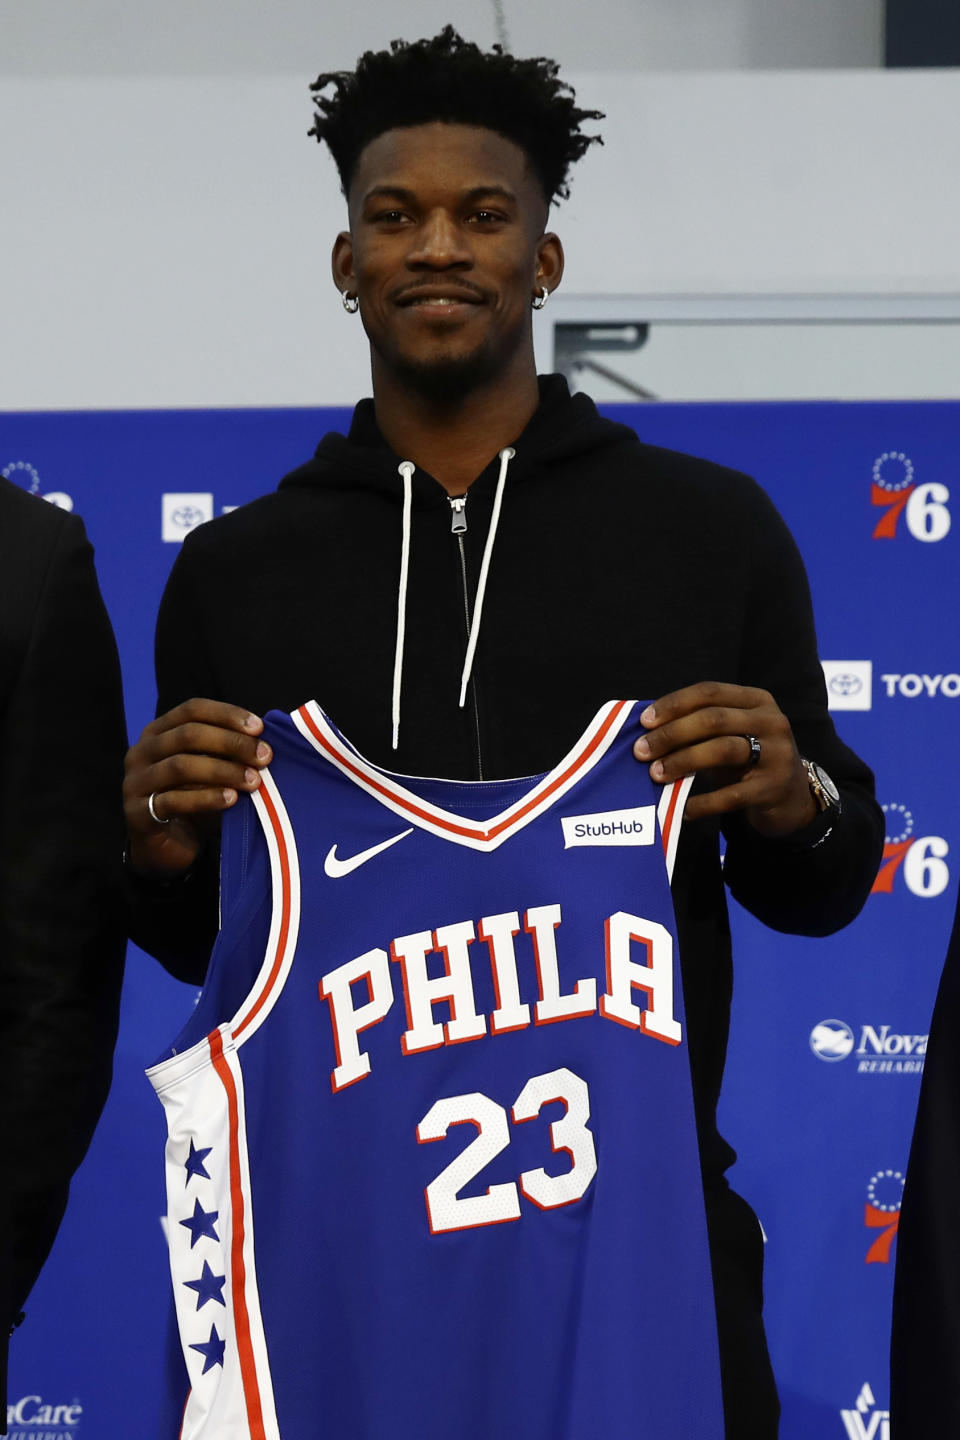 Philadelphia 76ers' Jimmy Butler poses during an introductory news conference at the NBA basketball team's practice facility in Camden, N.J., Tuesday, Nov. 13, 2018. (AP Photo/Matt Rourke)